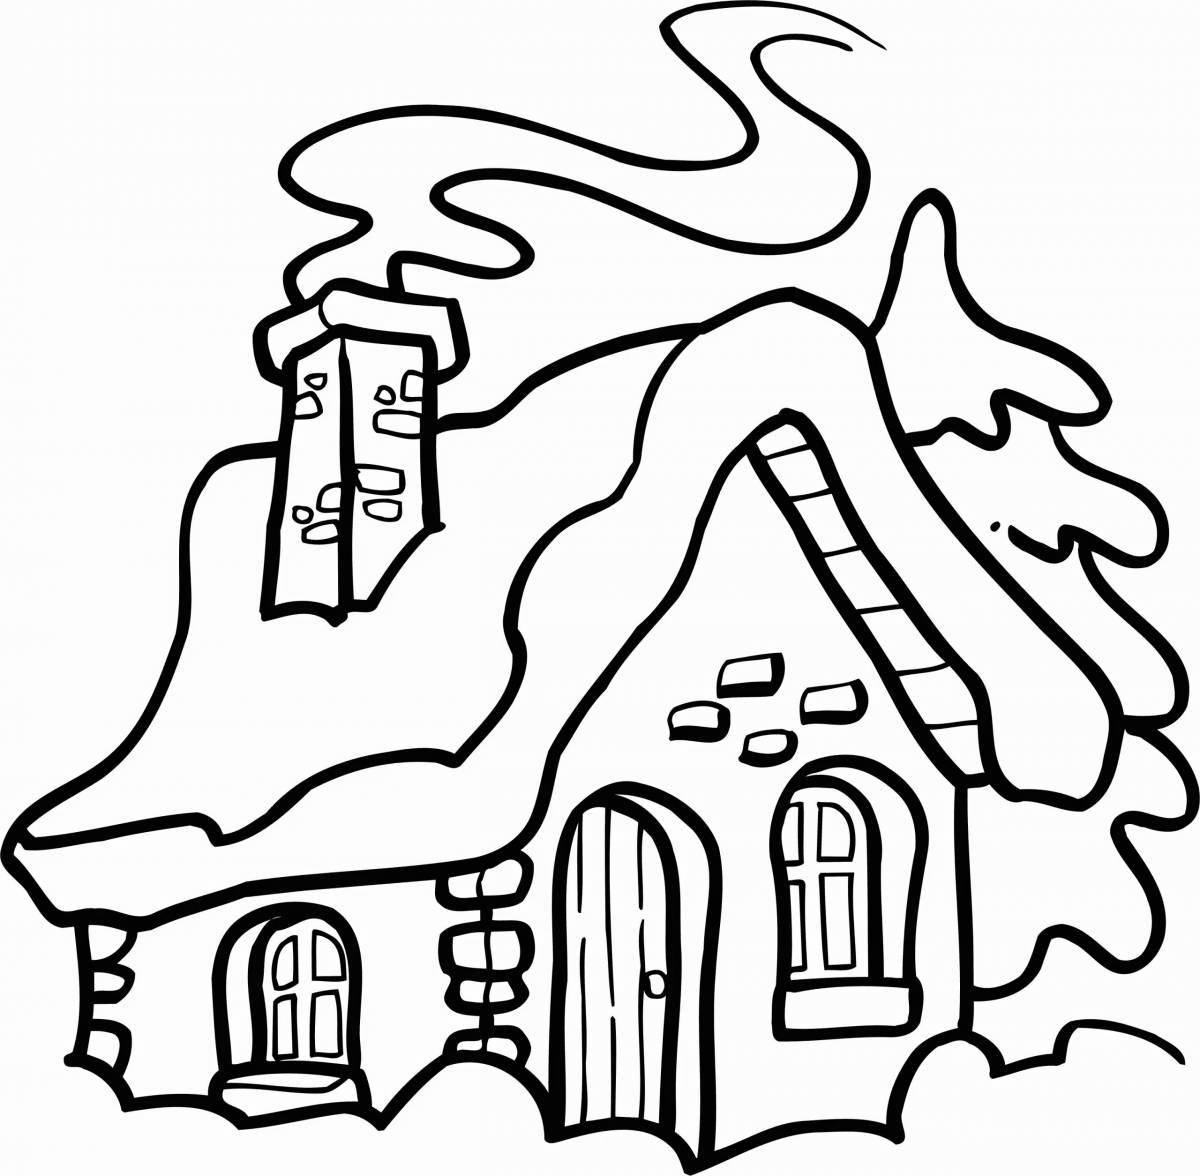 Coloring page elegant Christmas house